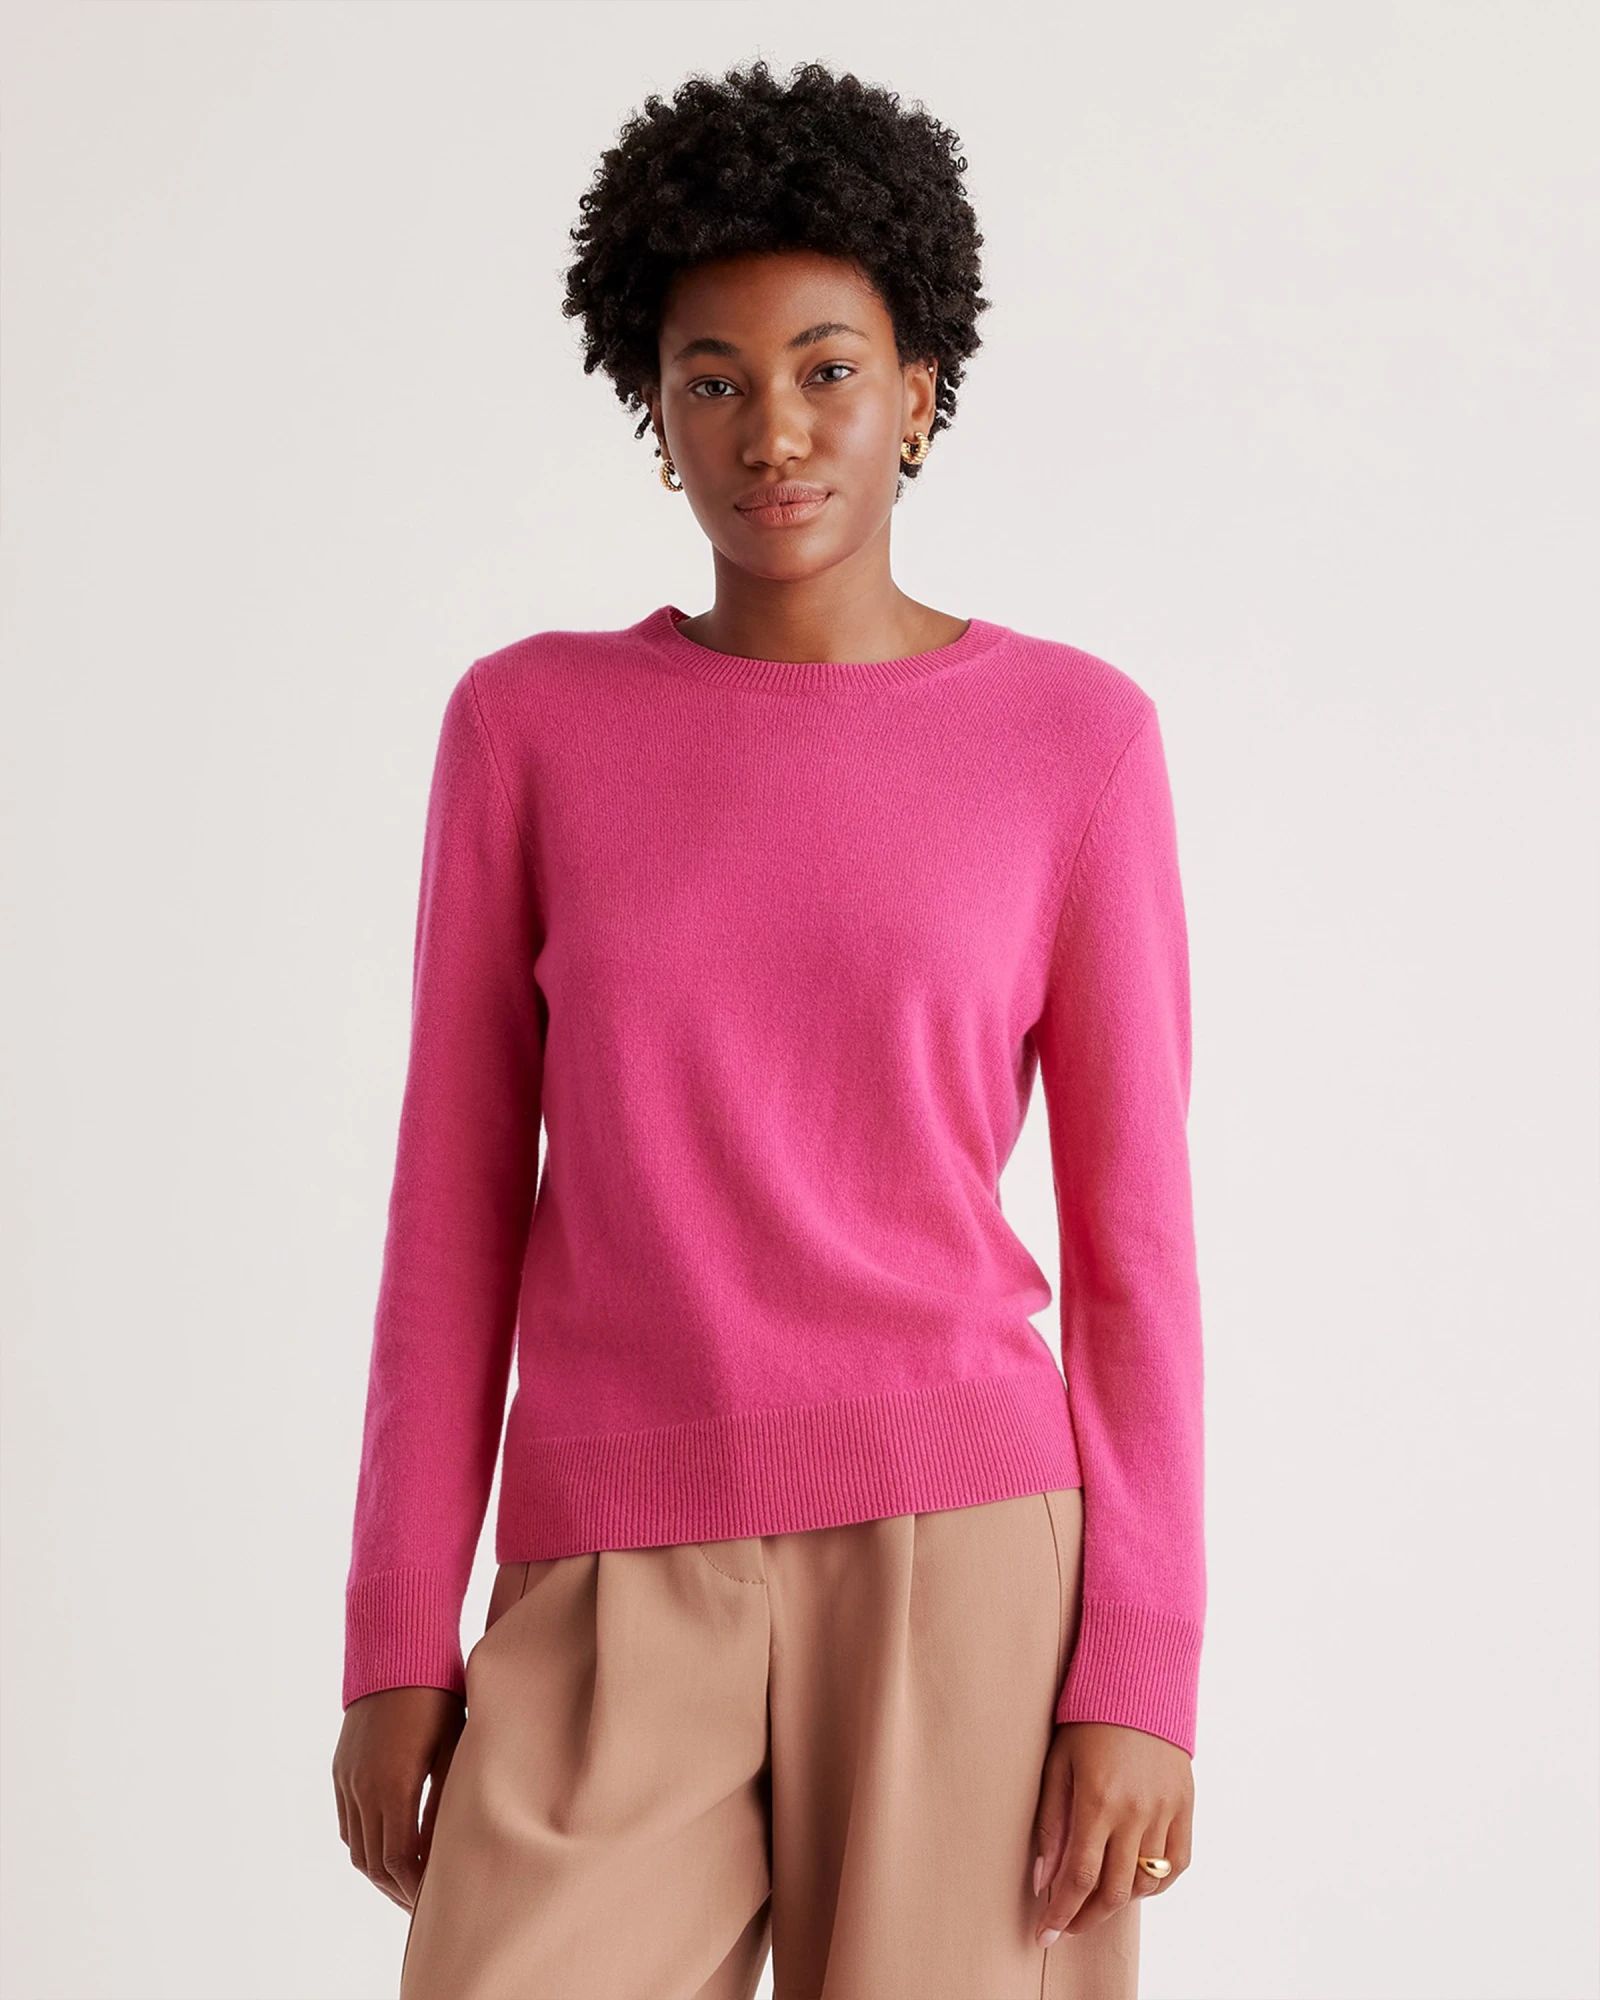 The $50 Cashmere Crewneck Sweater | Quince | Quince